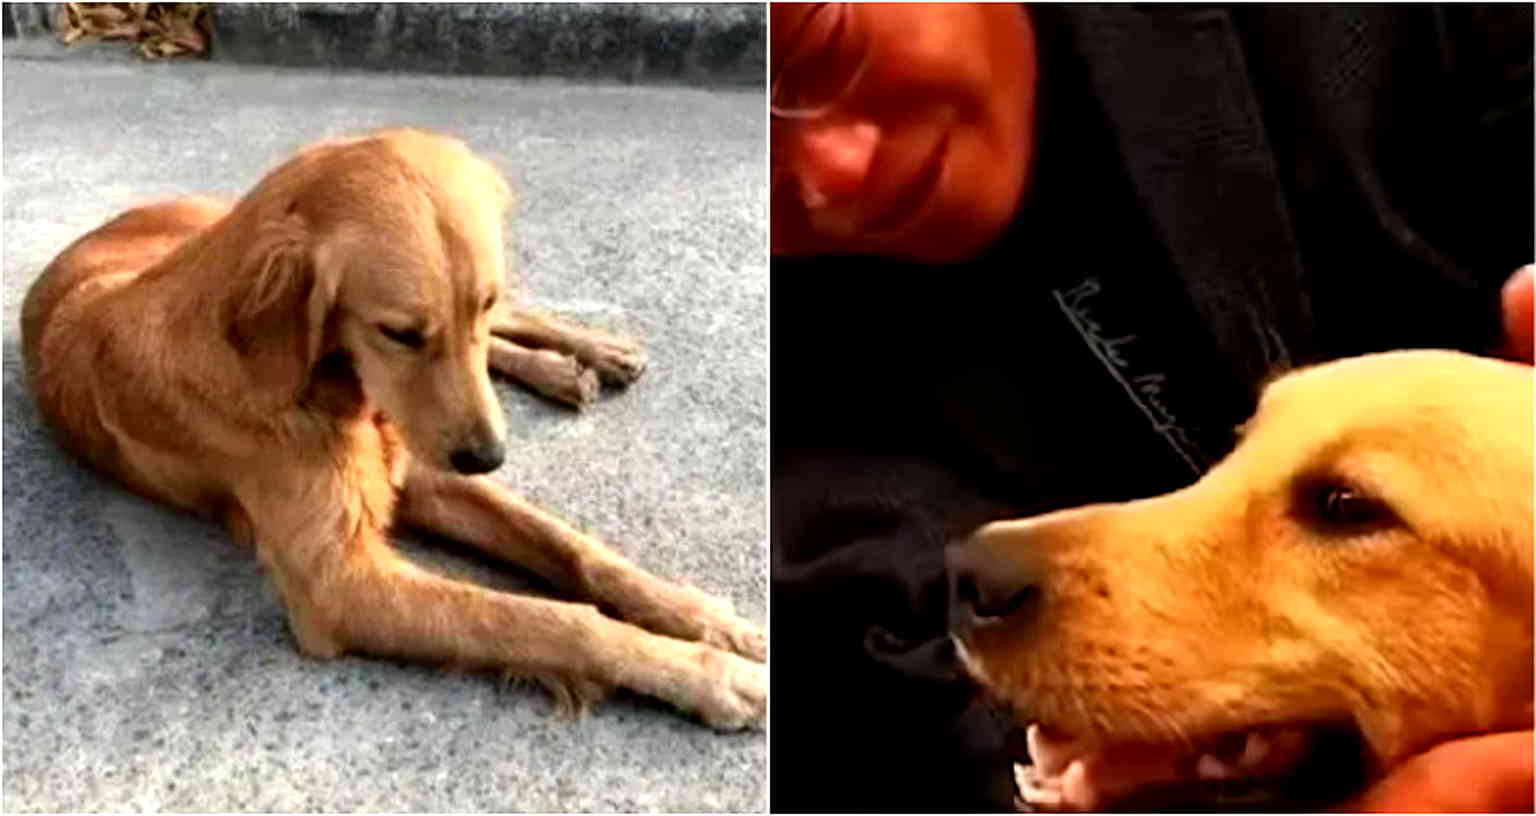 ‘Homesick’ Dog Walks 62 Miles With Bleeding Paws to Find Her Owners